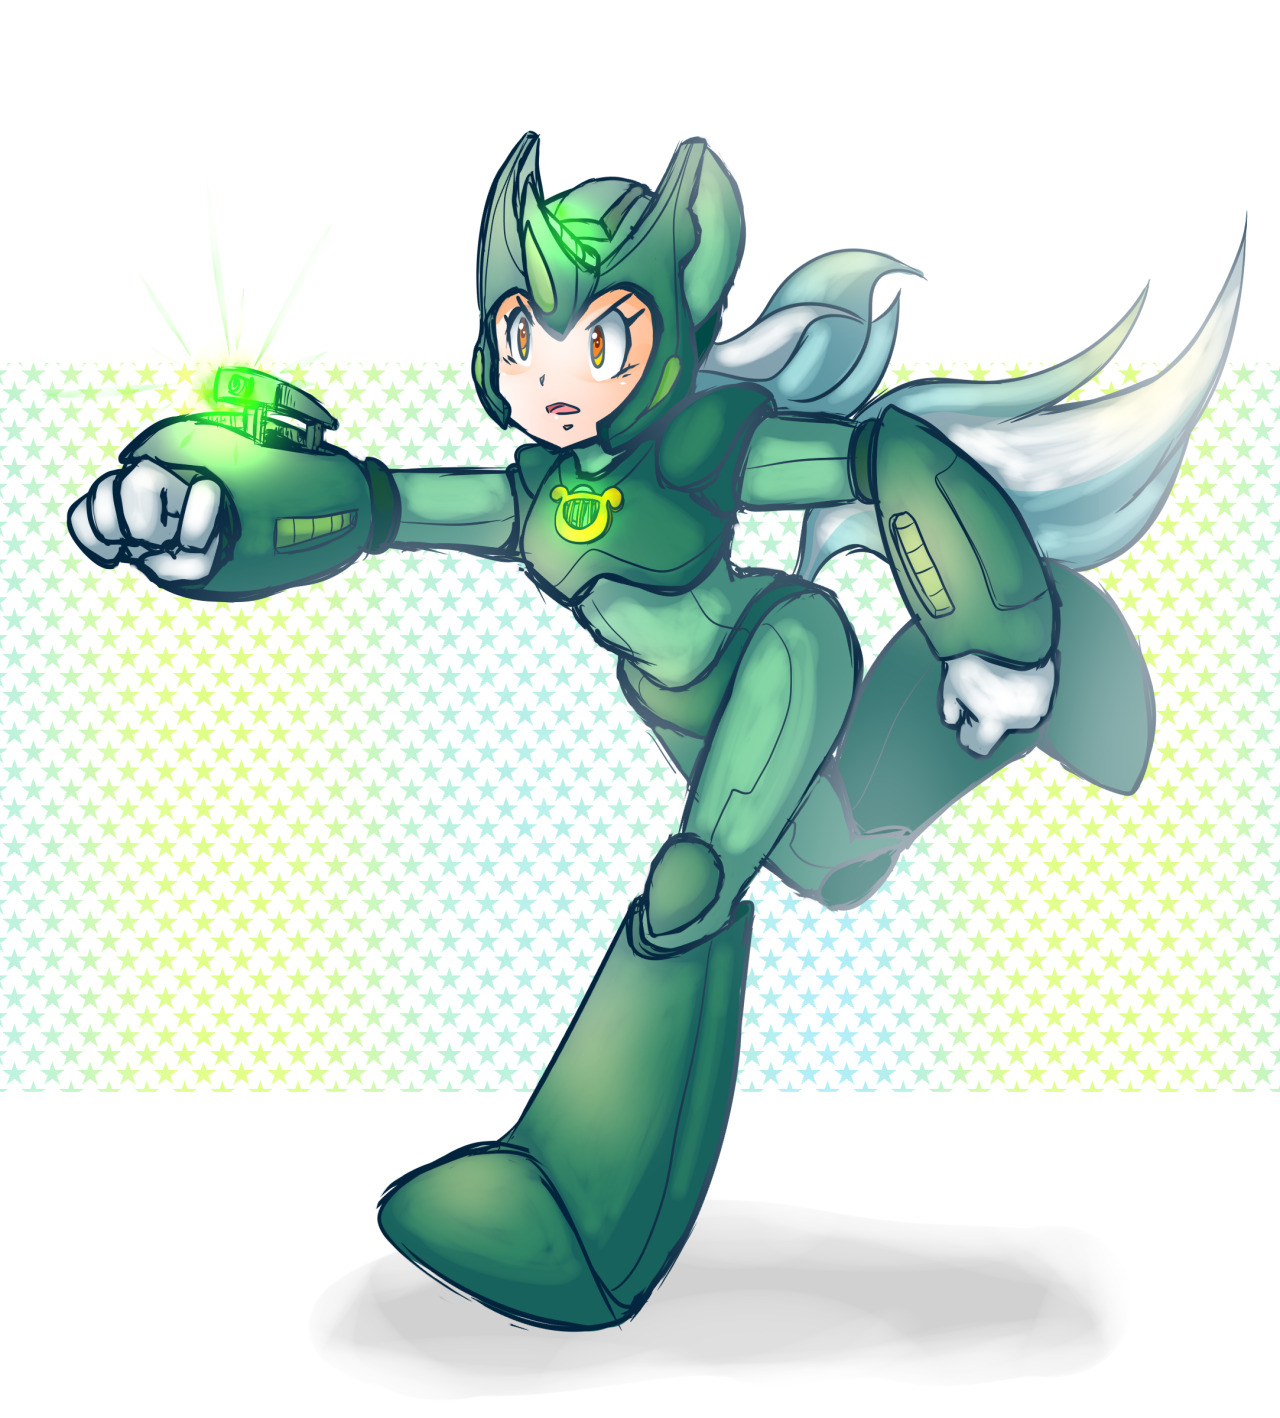 First up for some fanart, an absolutely amazing humanized version of Lyra with her MegaMare X armor. Pretty spot-on for the details. I can’t wait to reveal the final armour and see what might come of it!
Humanised MegaMare X Lyra, by thegreatrouge